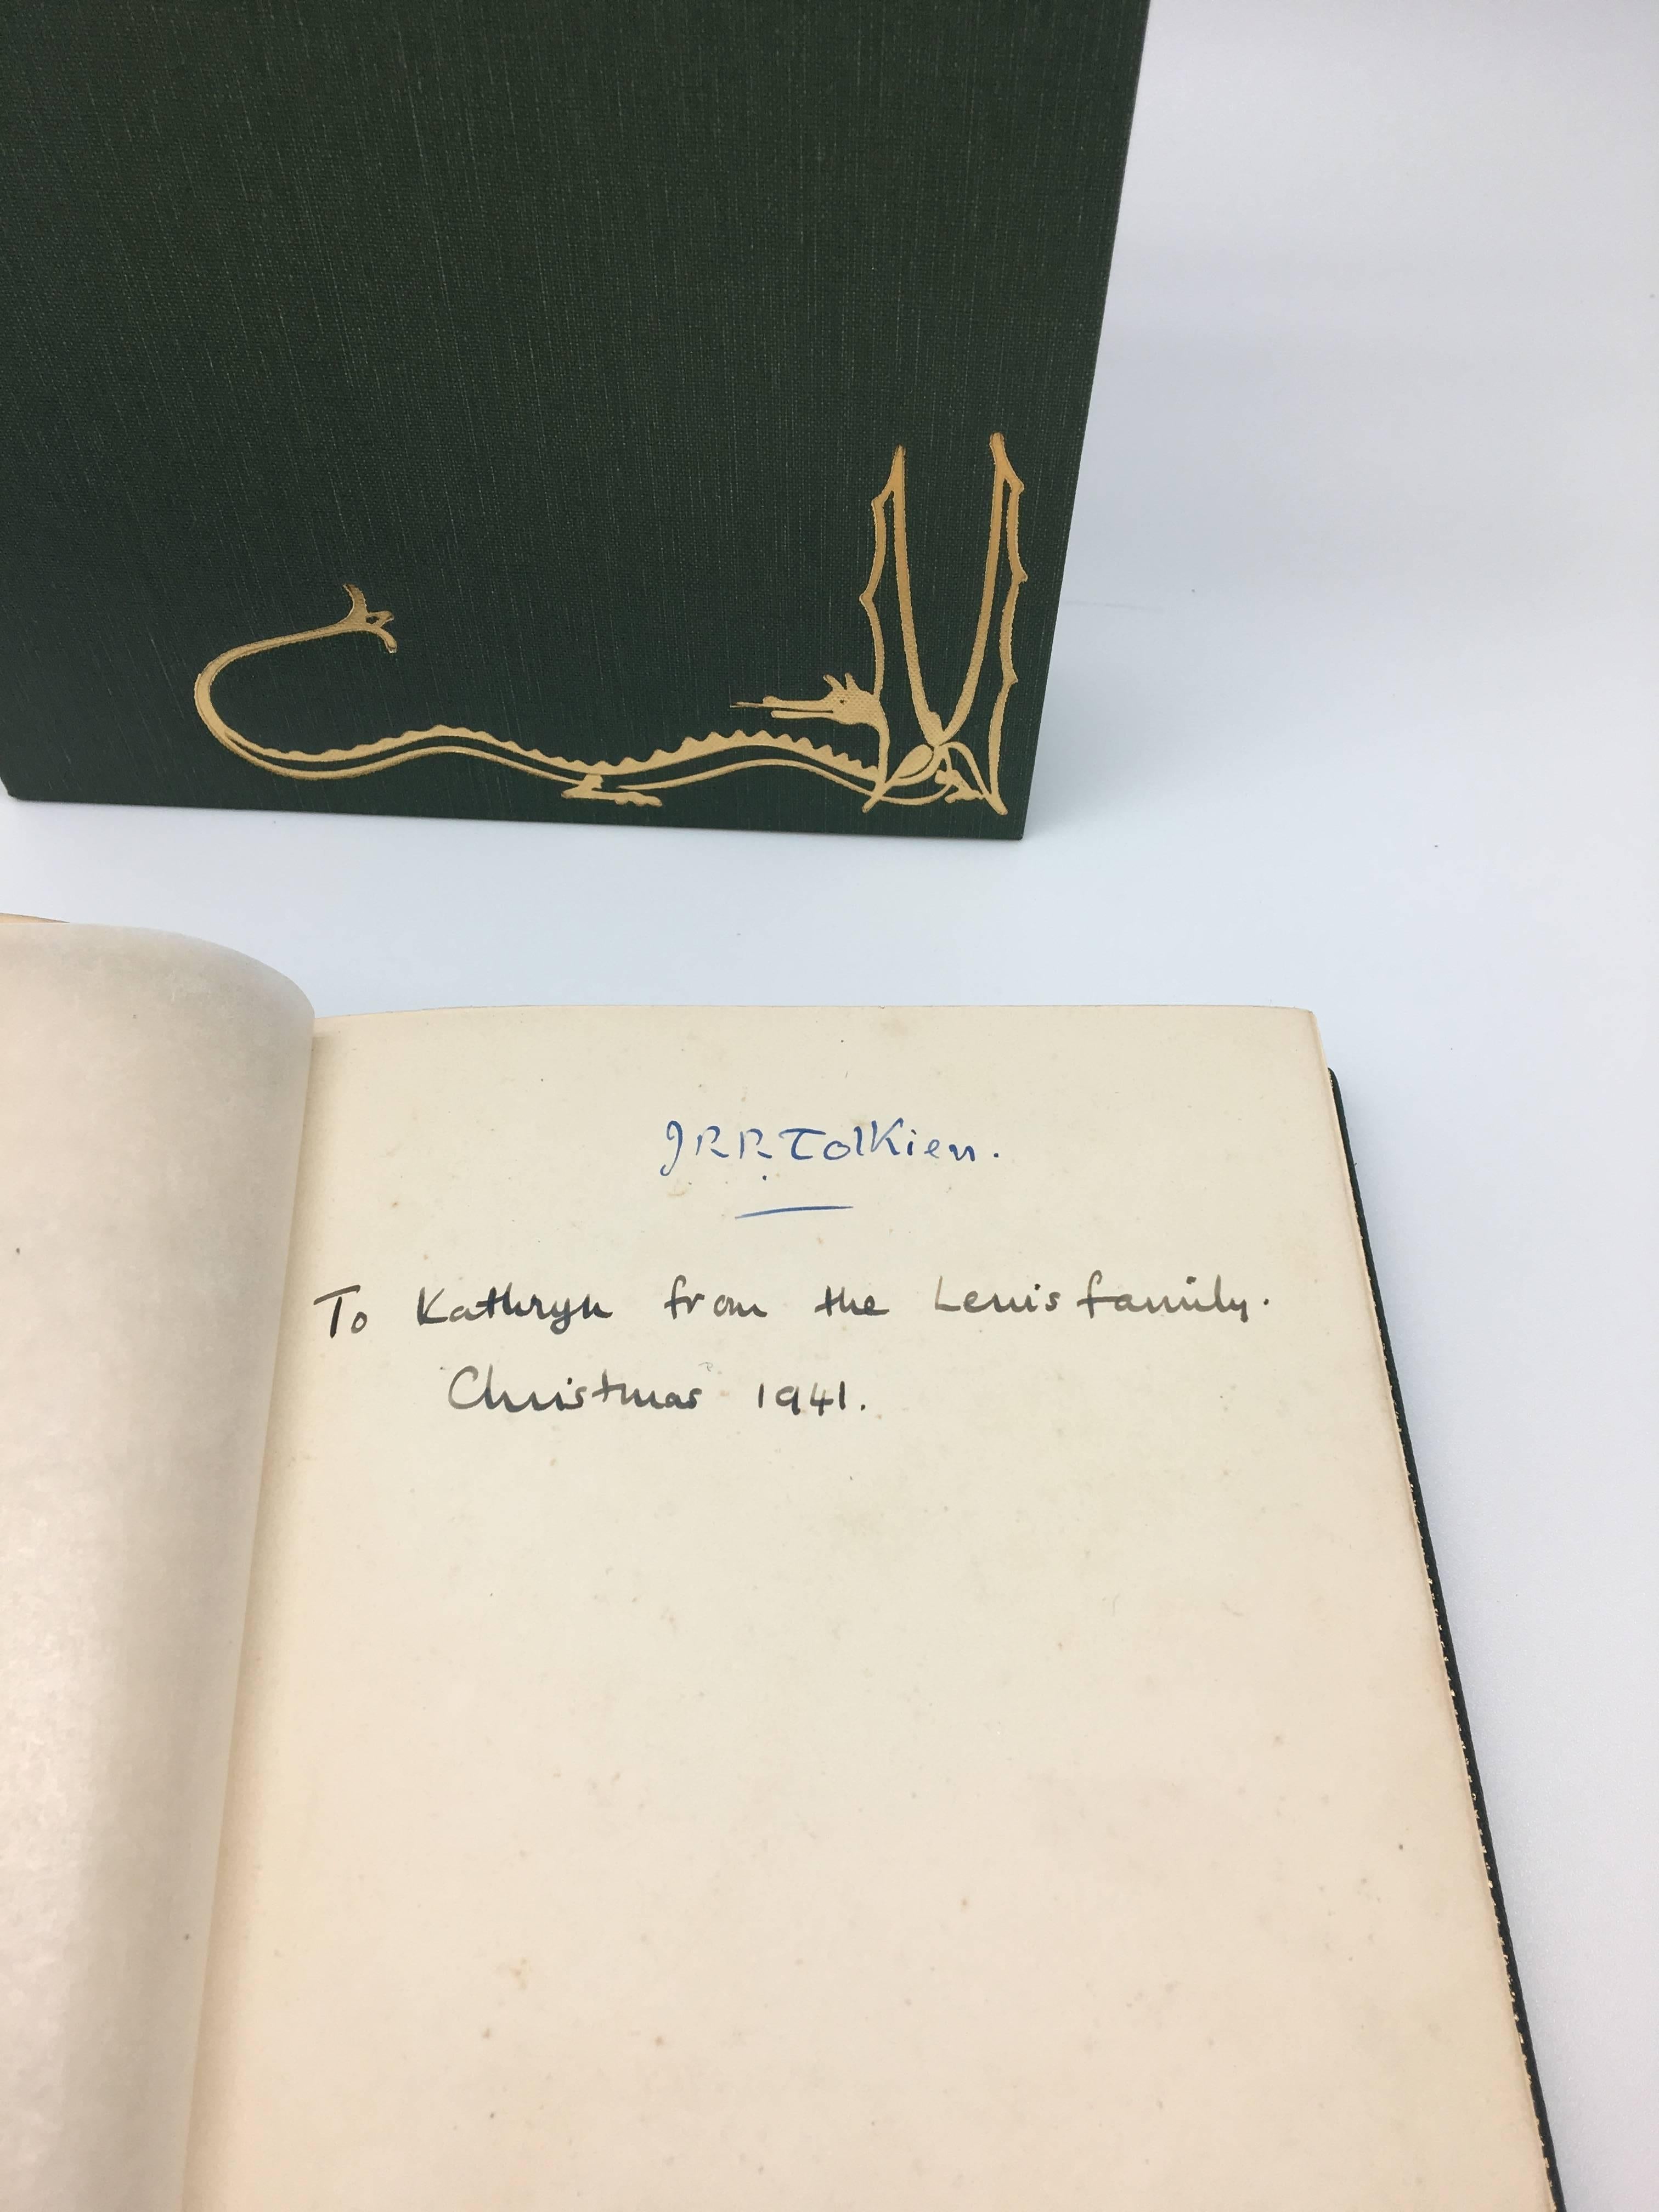 First edition, first printing, of J. R .R. Tolkien's fantasy classic—”among the very highest achievements of children’s authors during the 20th century” (Carpenter & Pritchard, 530)—one of only 1500 copies printed. A beautiful, finely bound leather